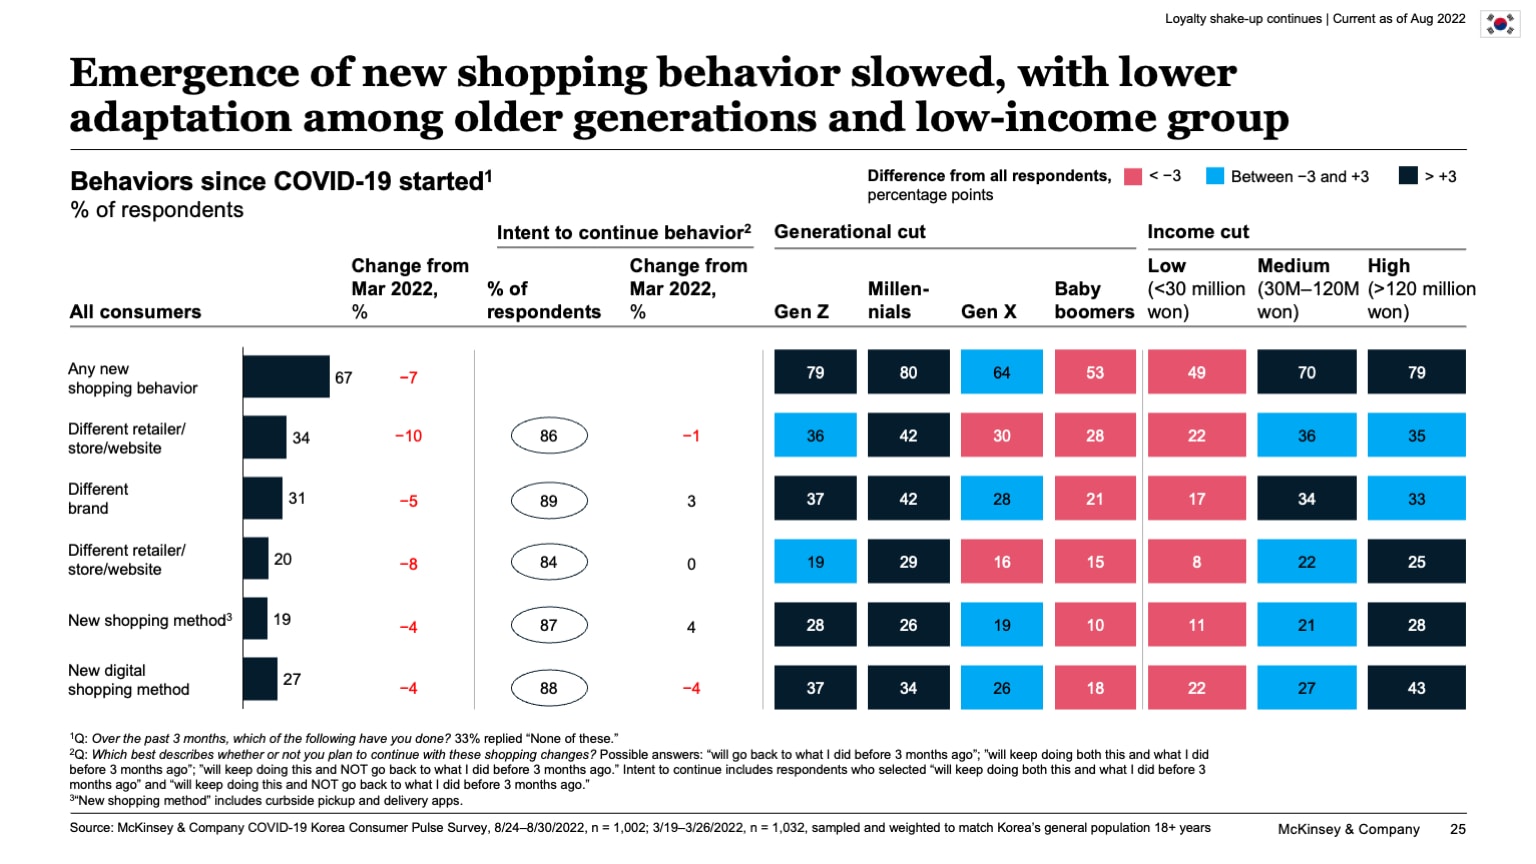 Emergence of new shopping behavior slowed, with lower adaptation among older generations and low-income group